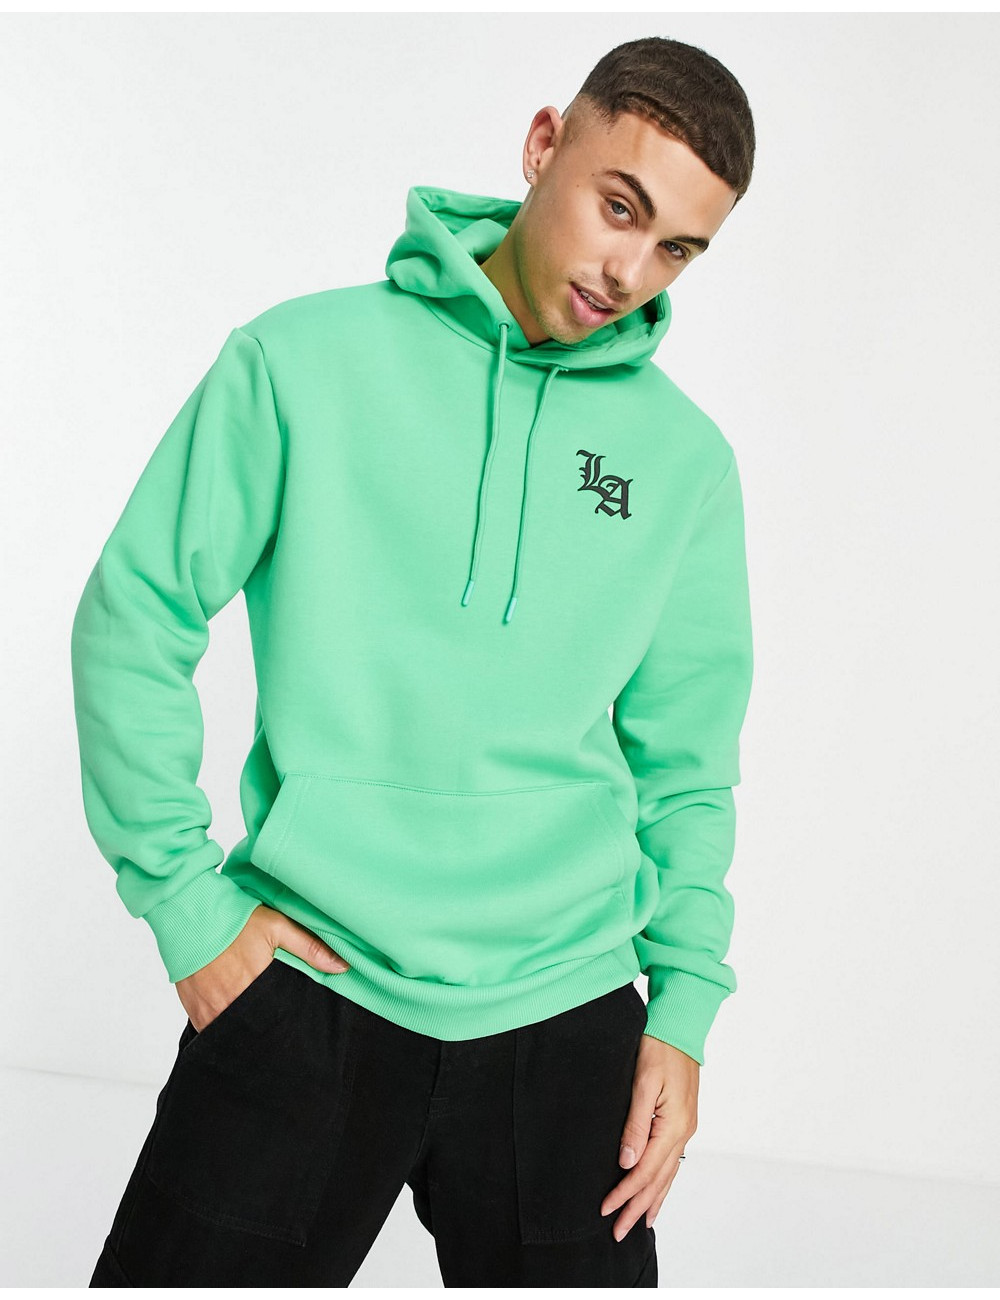 River Island hoodie with...